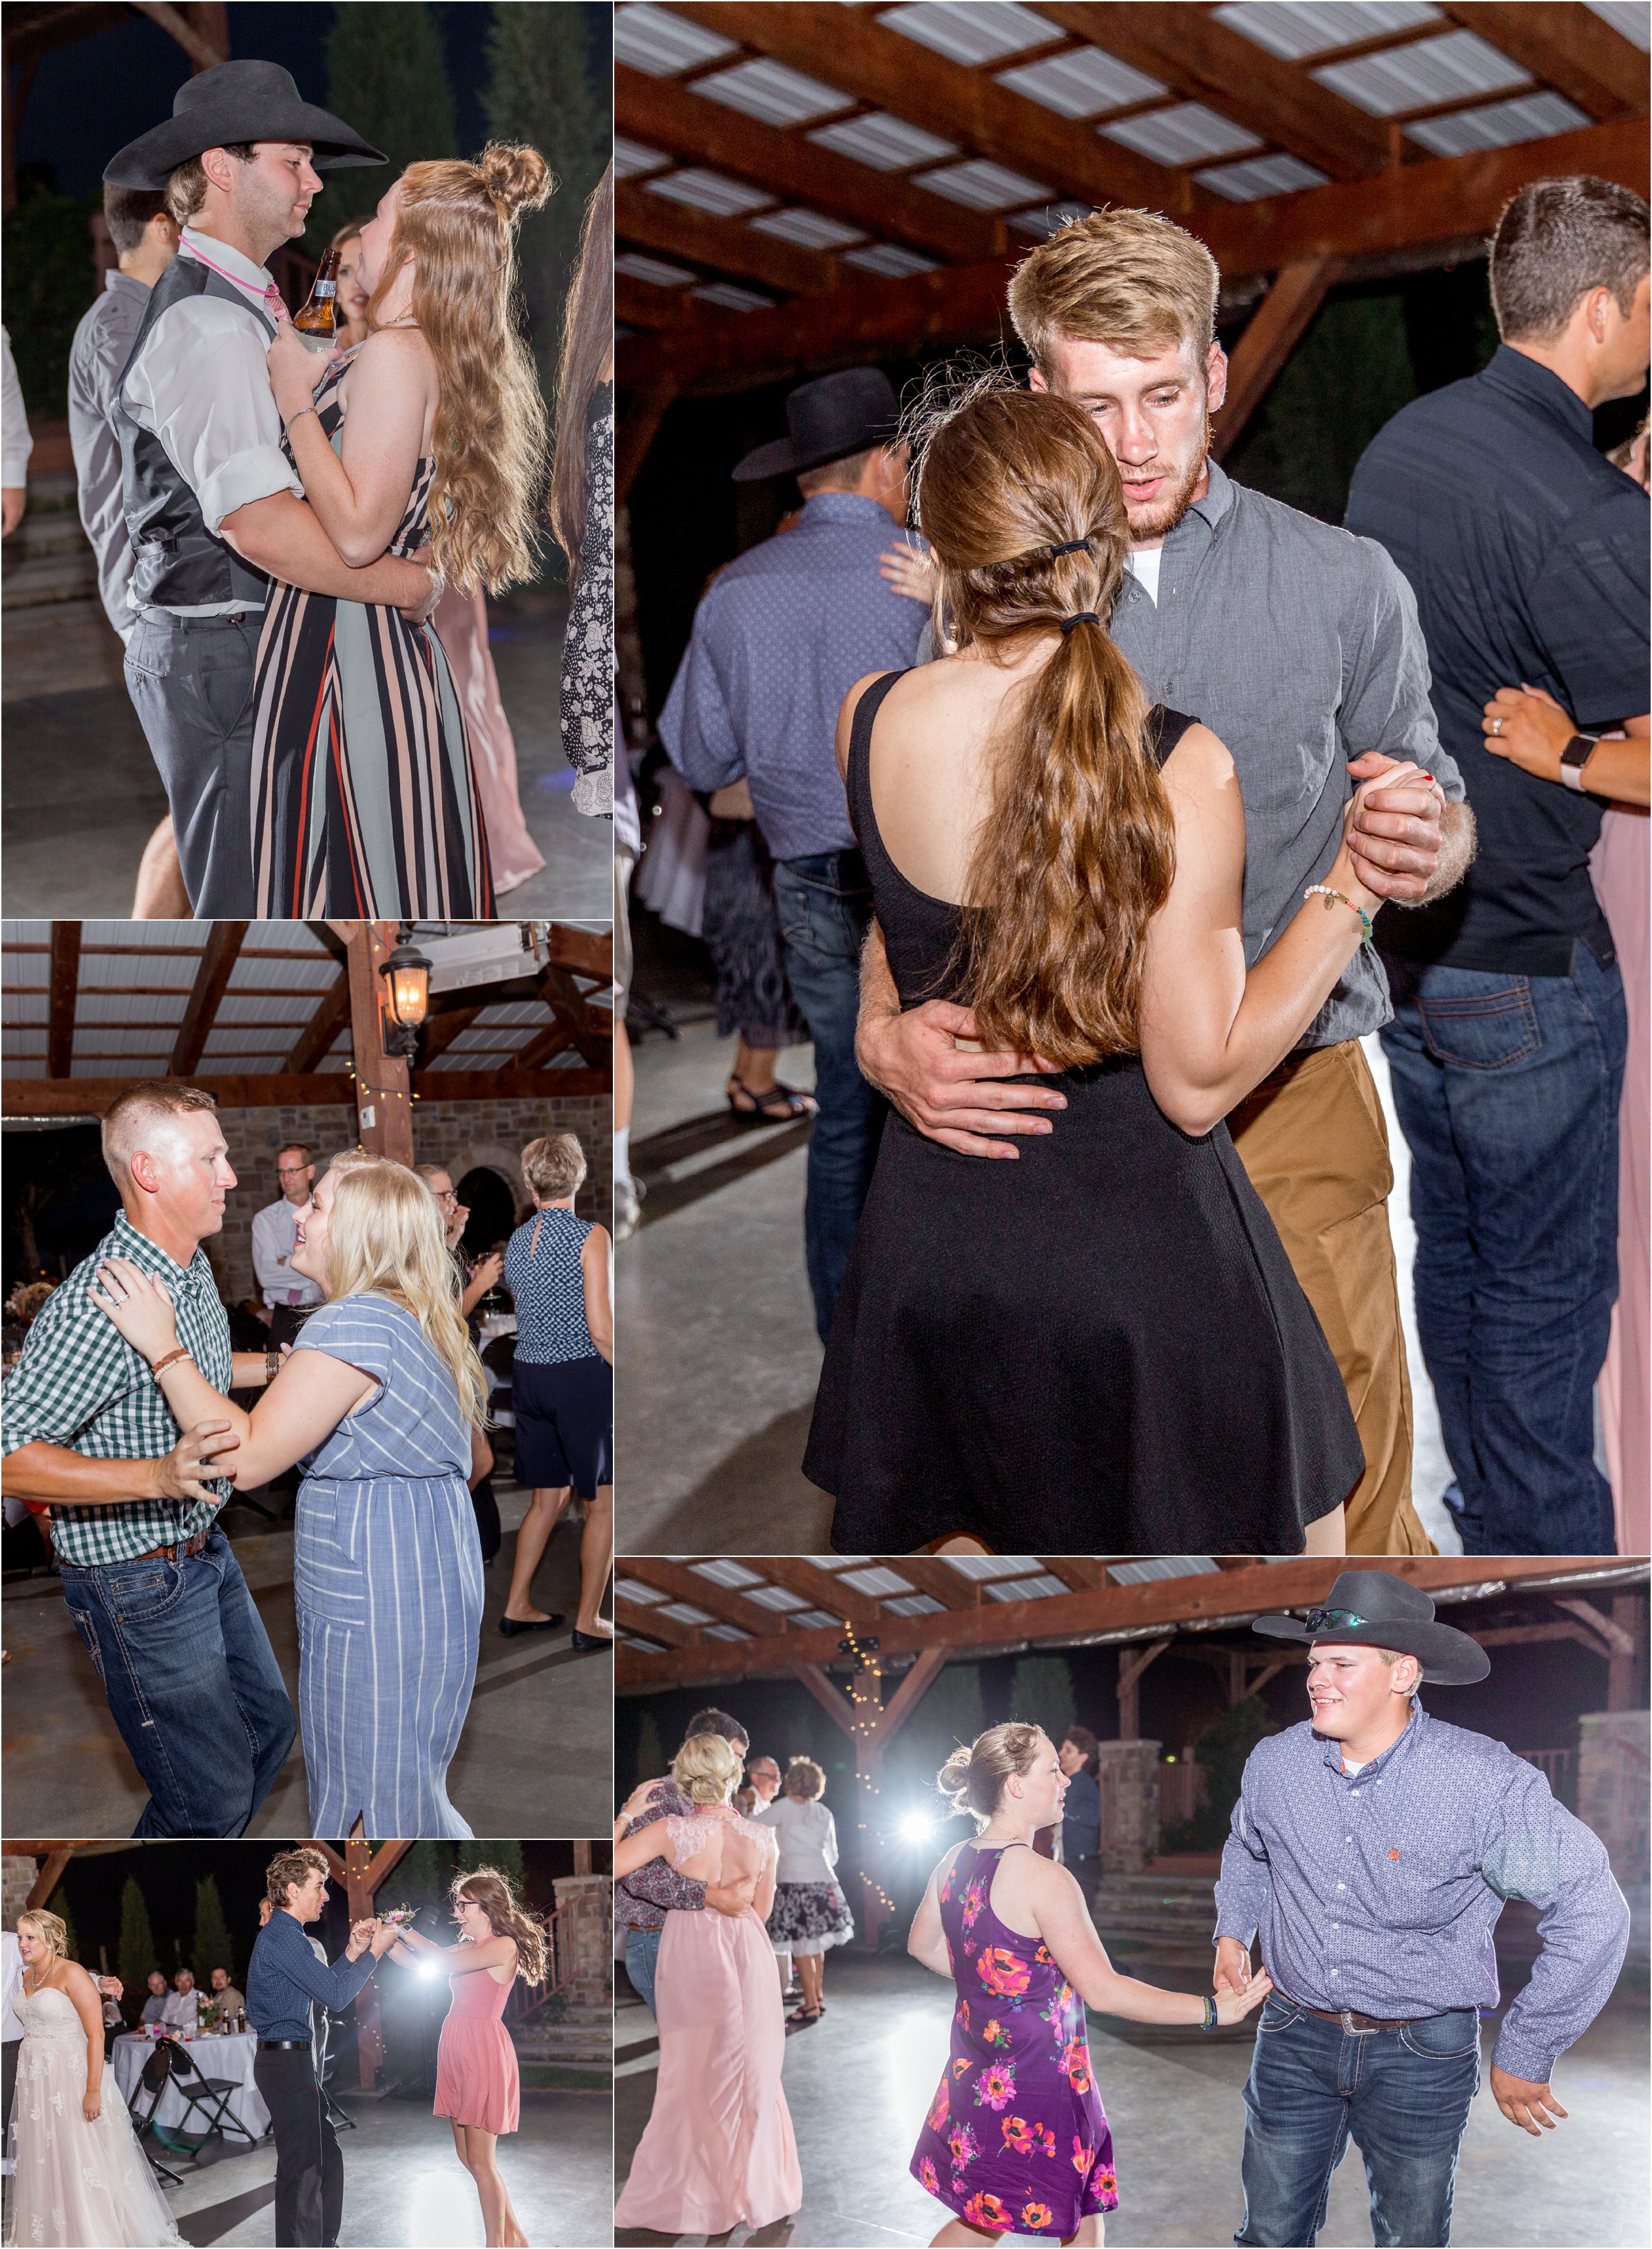 bride and groom dance with their guests at their wedding reception